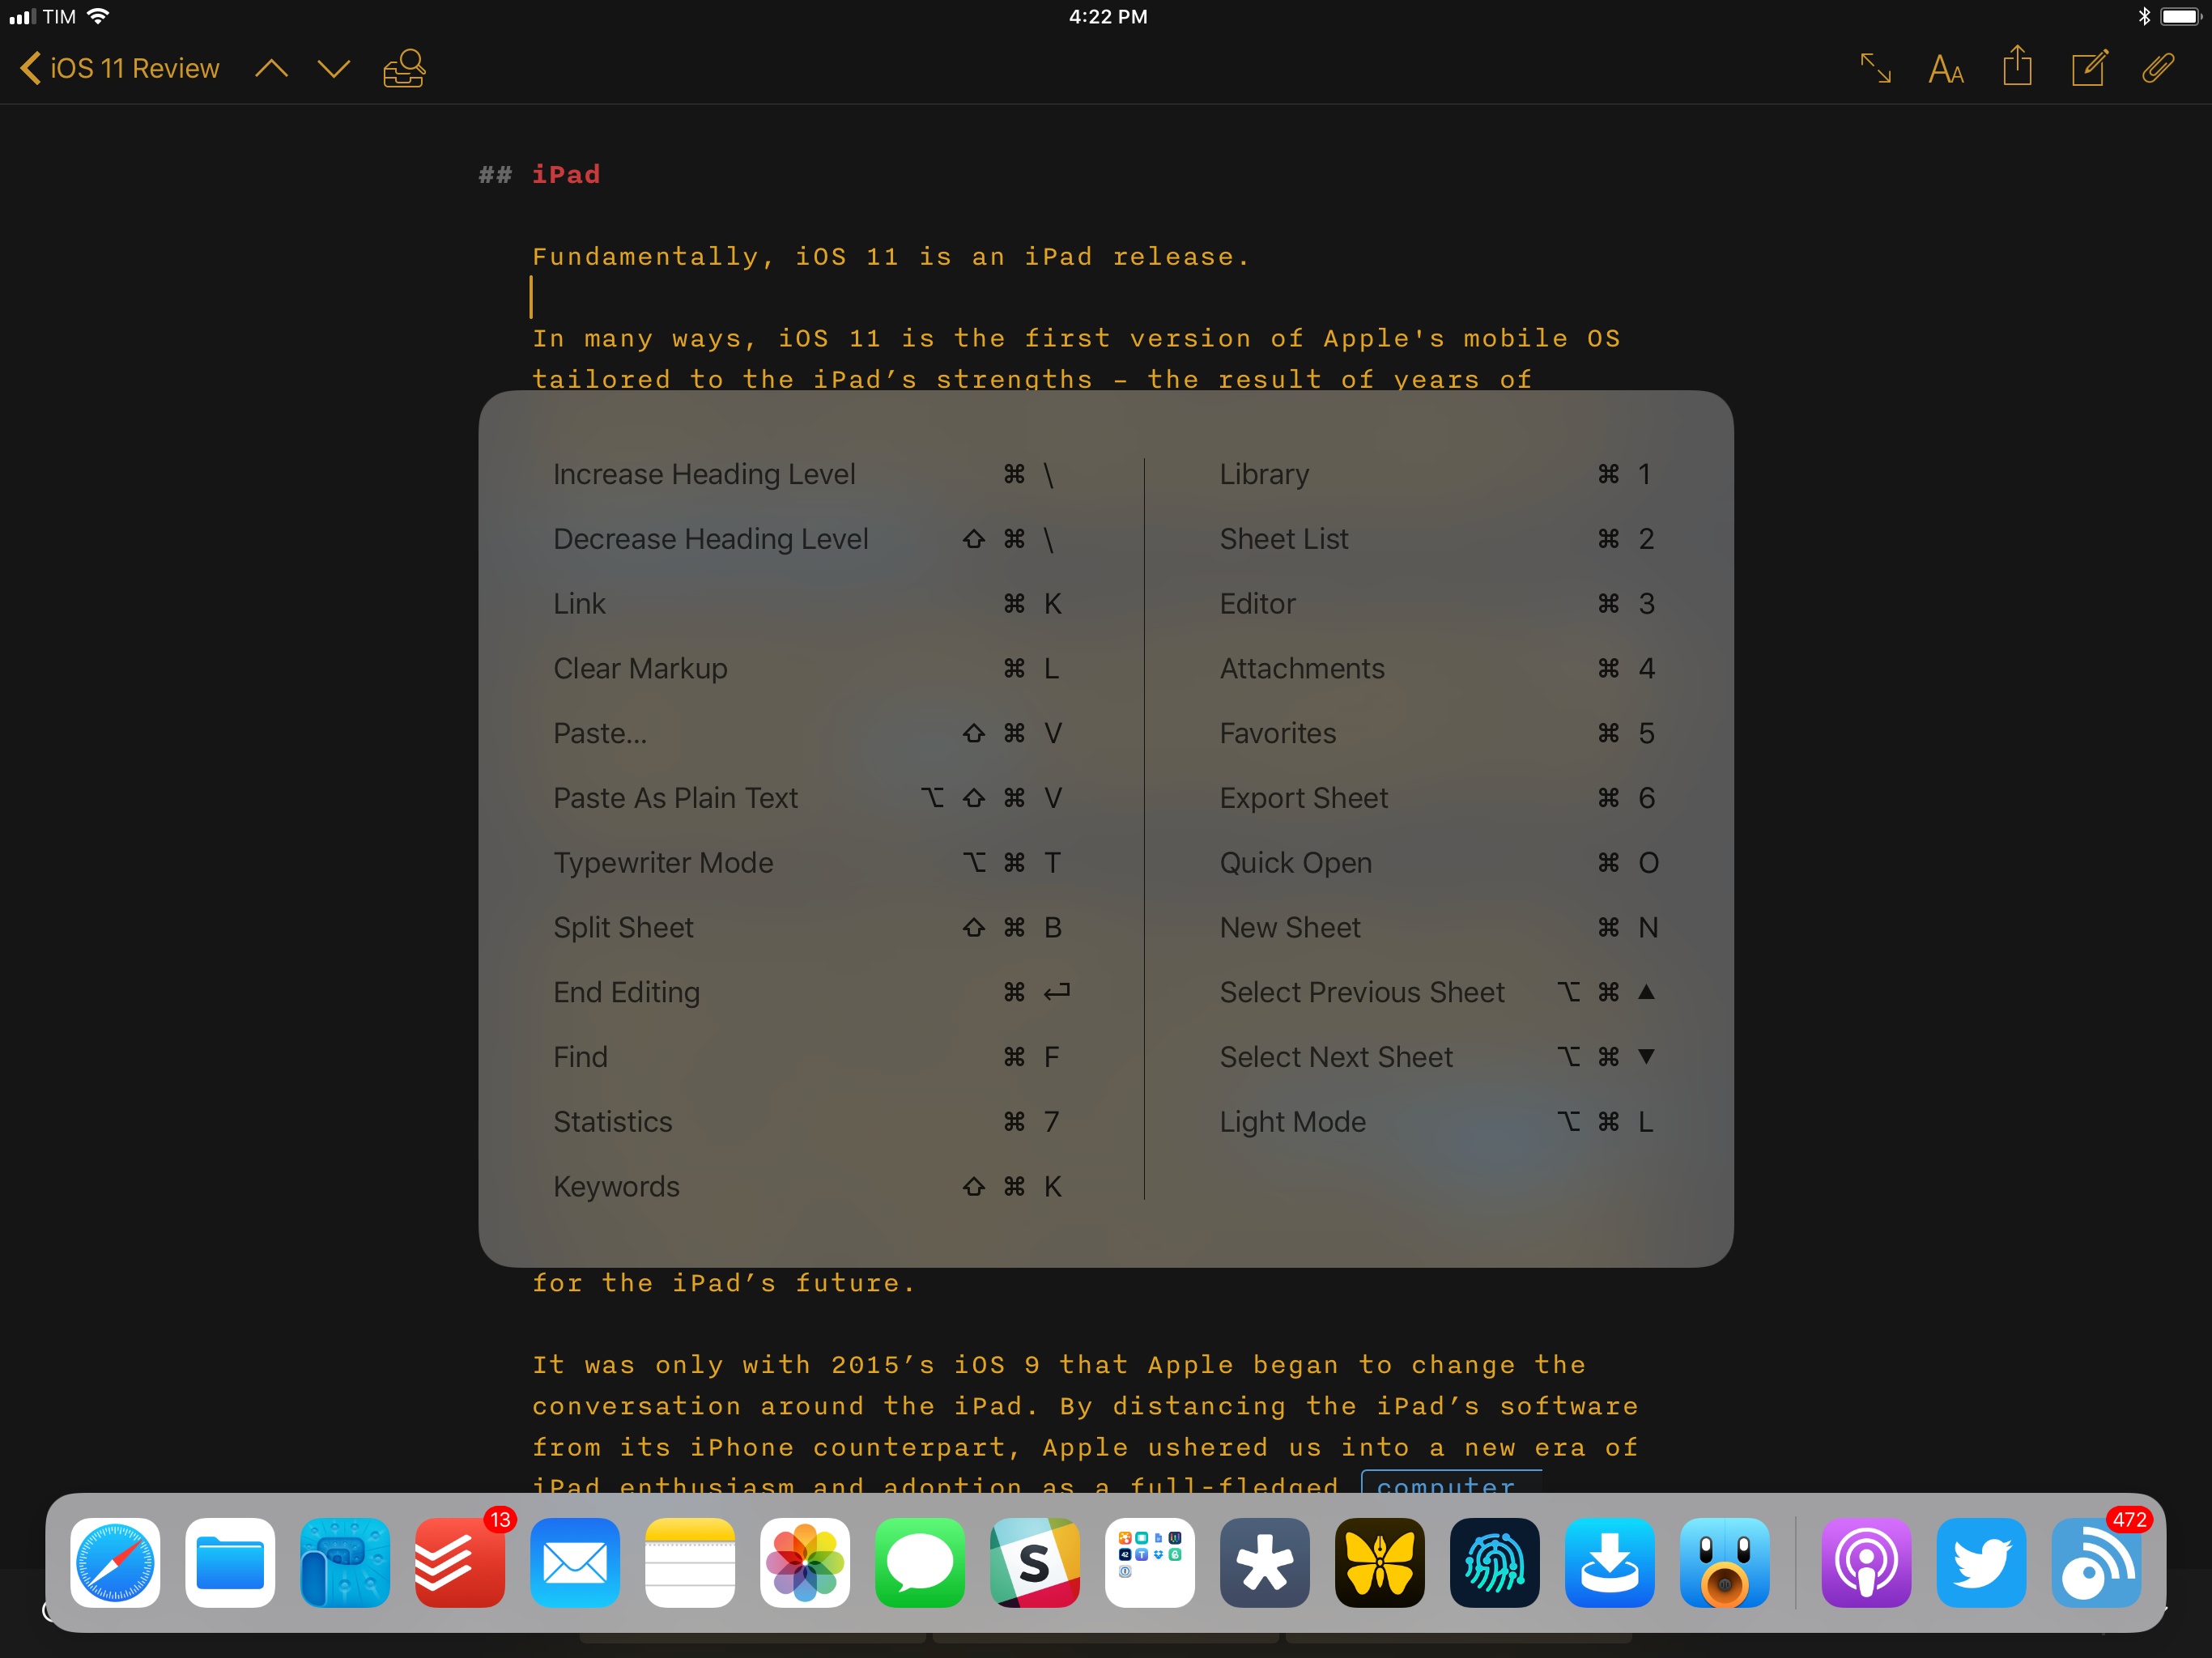 Keyboard input remains active in the foreground app while the dock is shown.